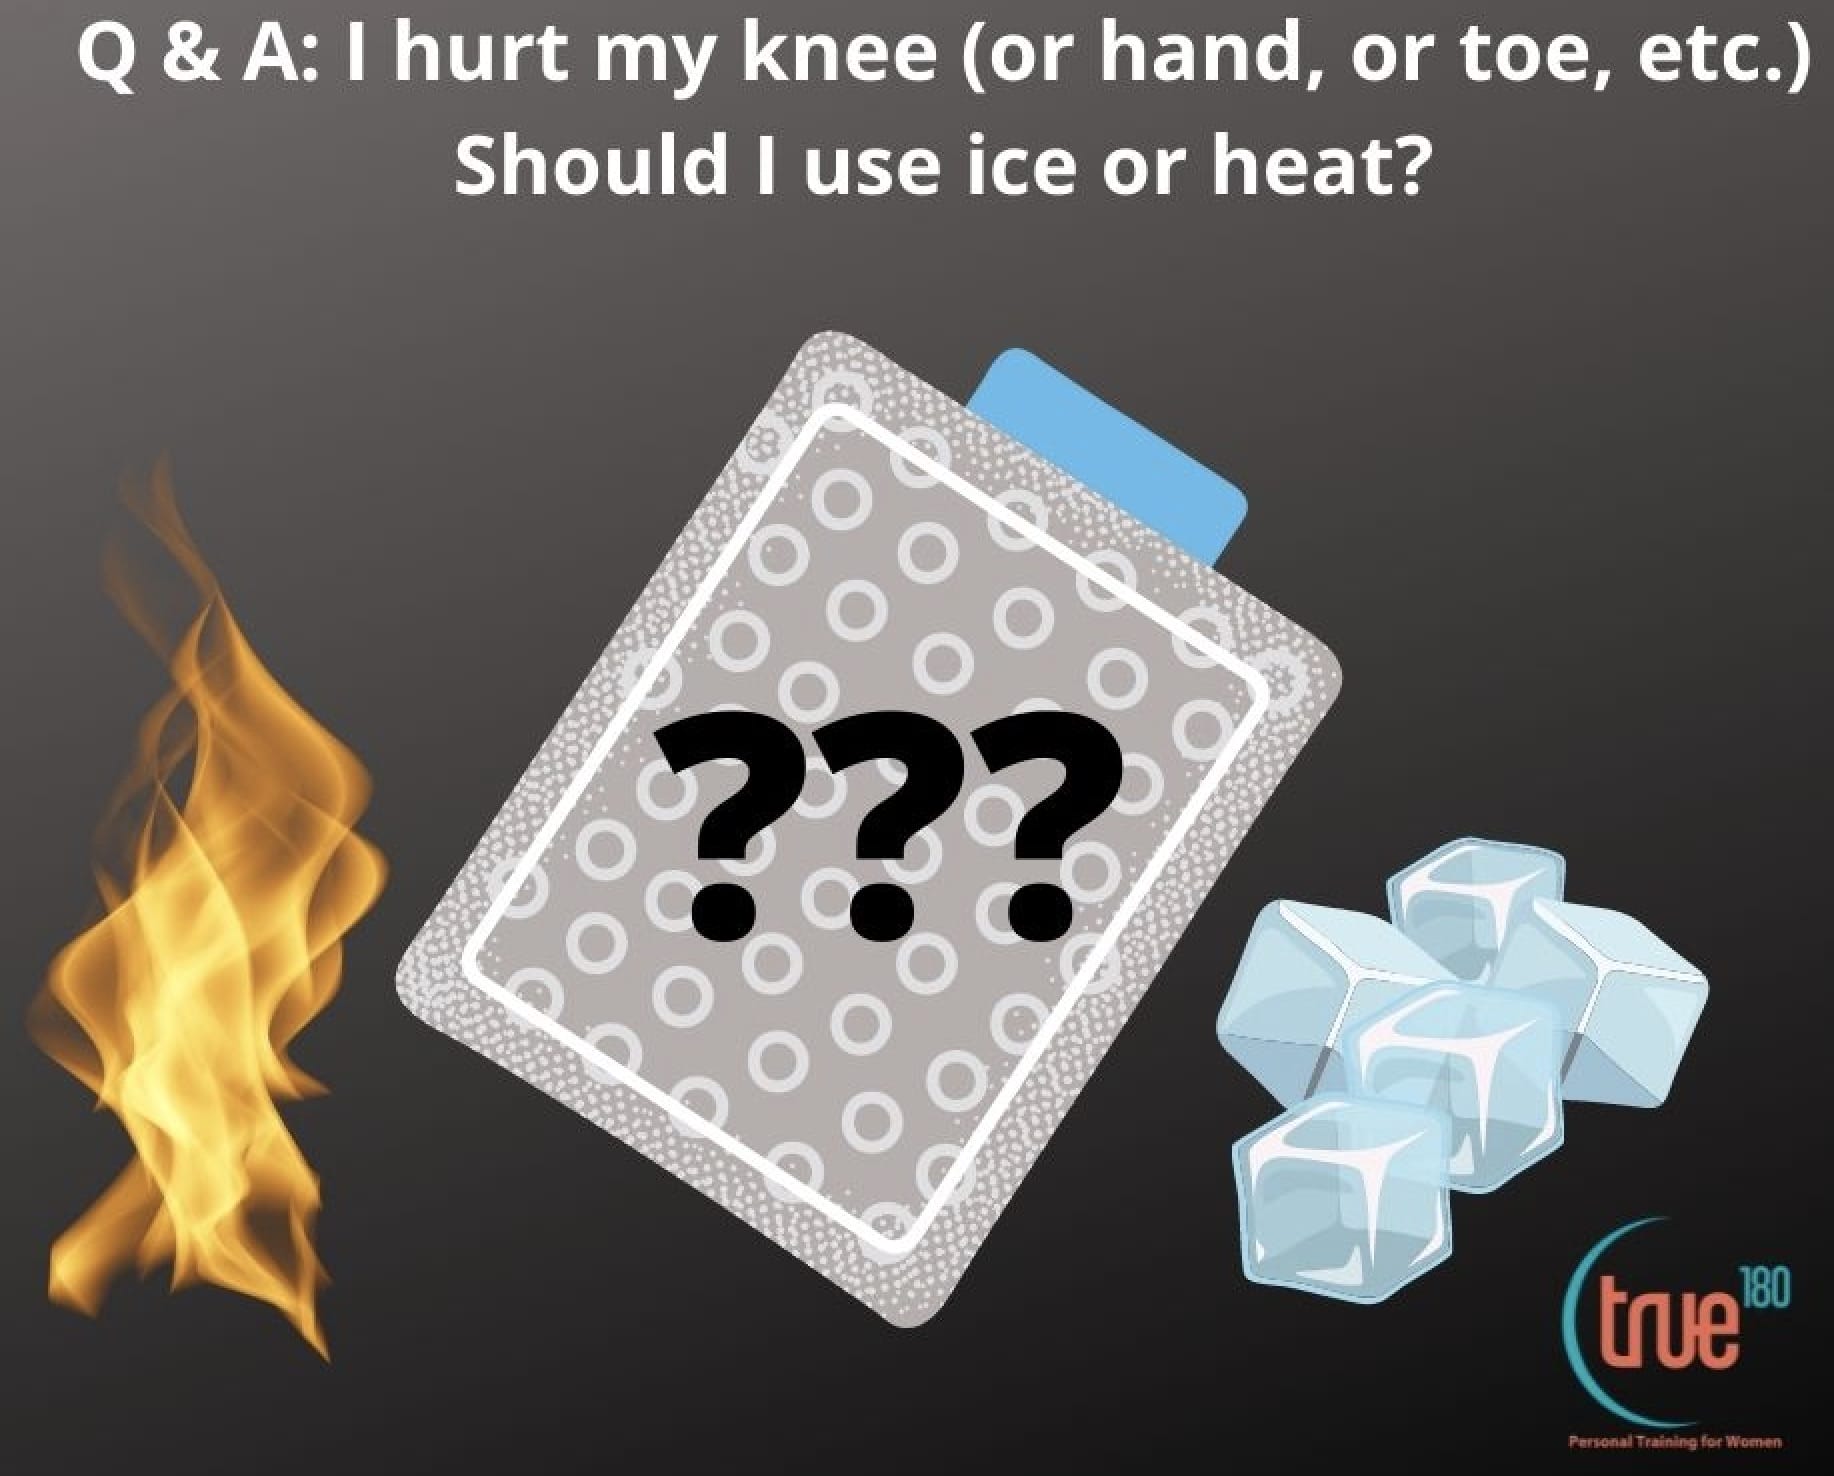 True 180 Personal Training | Should I Use Ice or Heat?